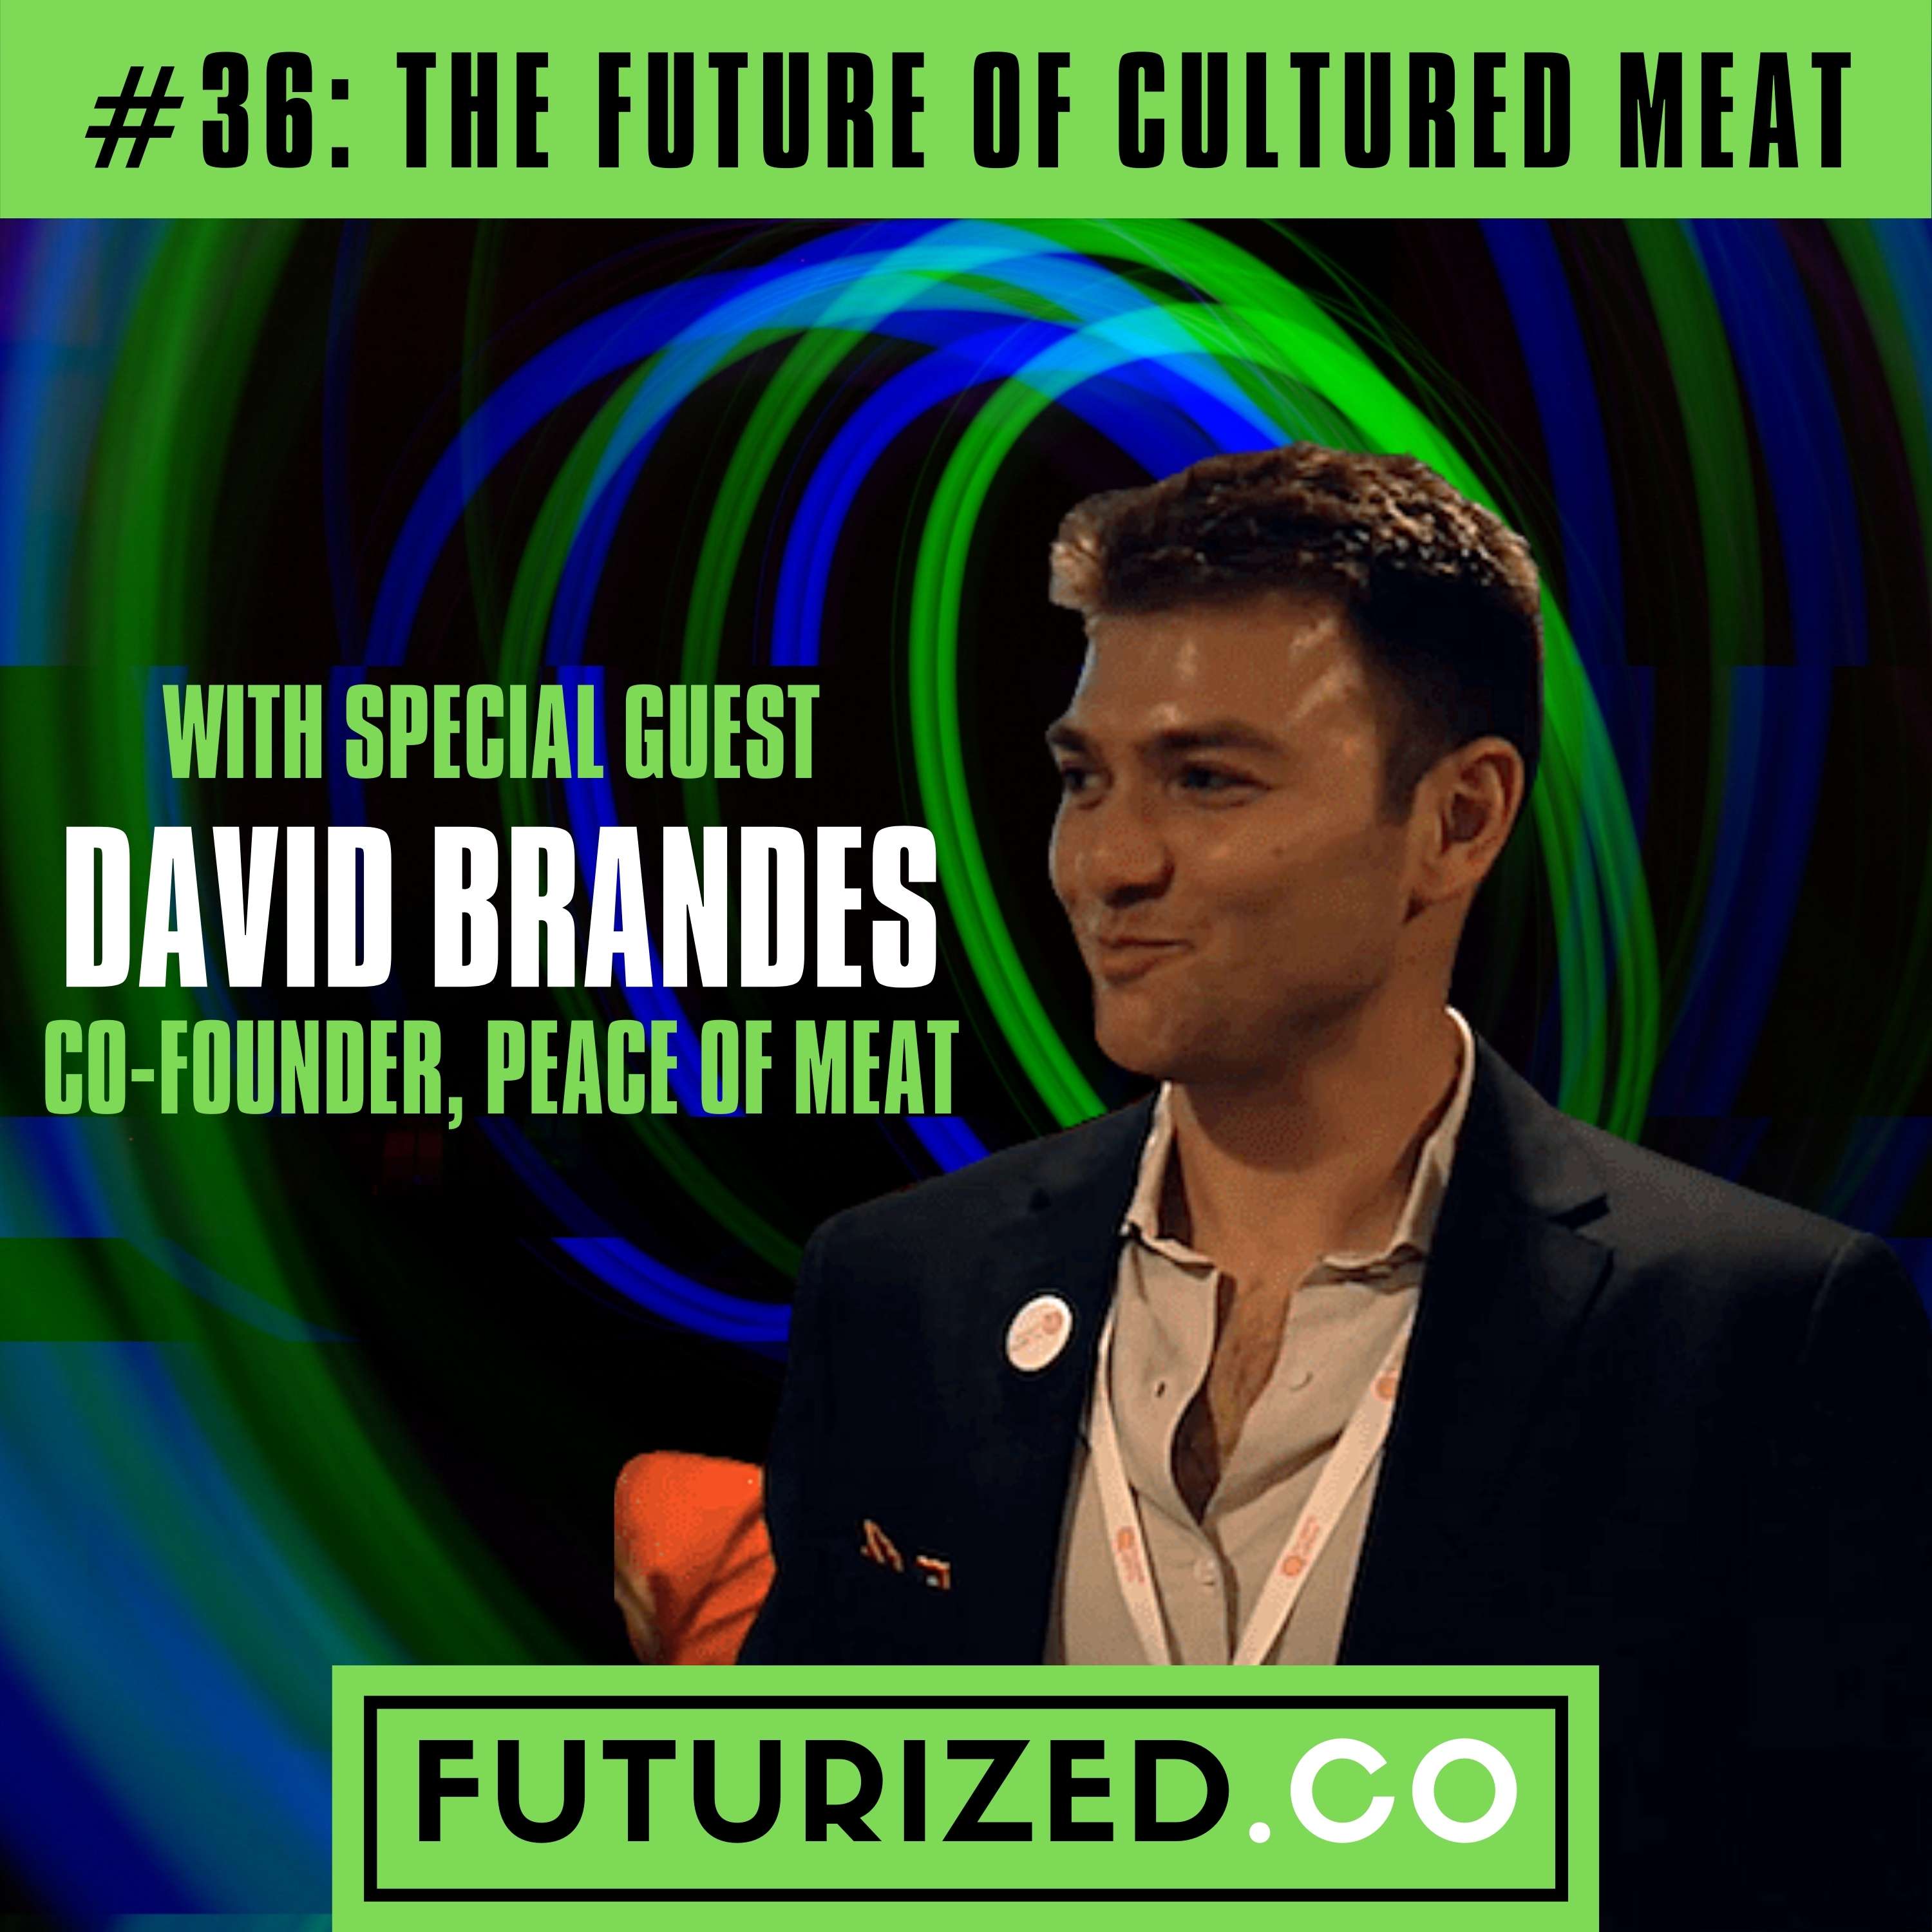 The Future of Cultured Meat Image